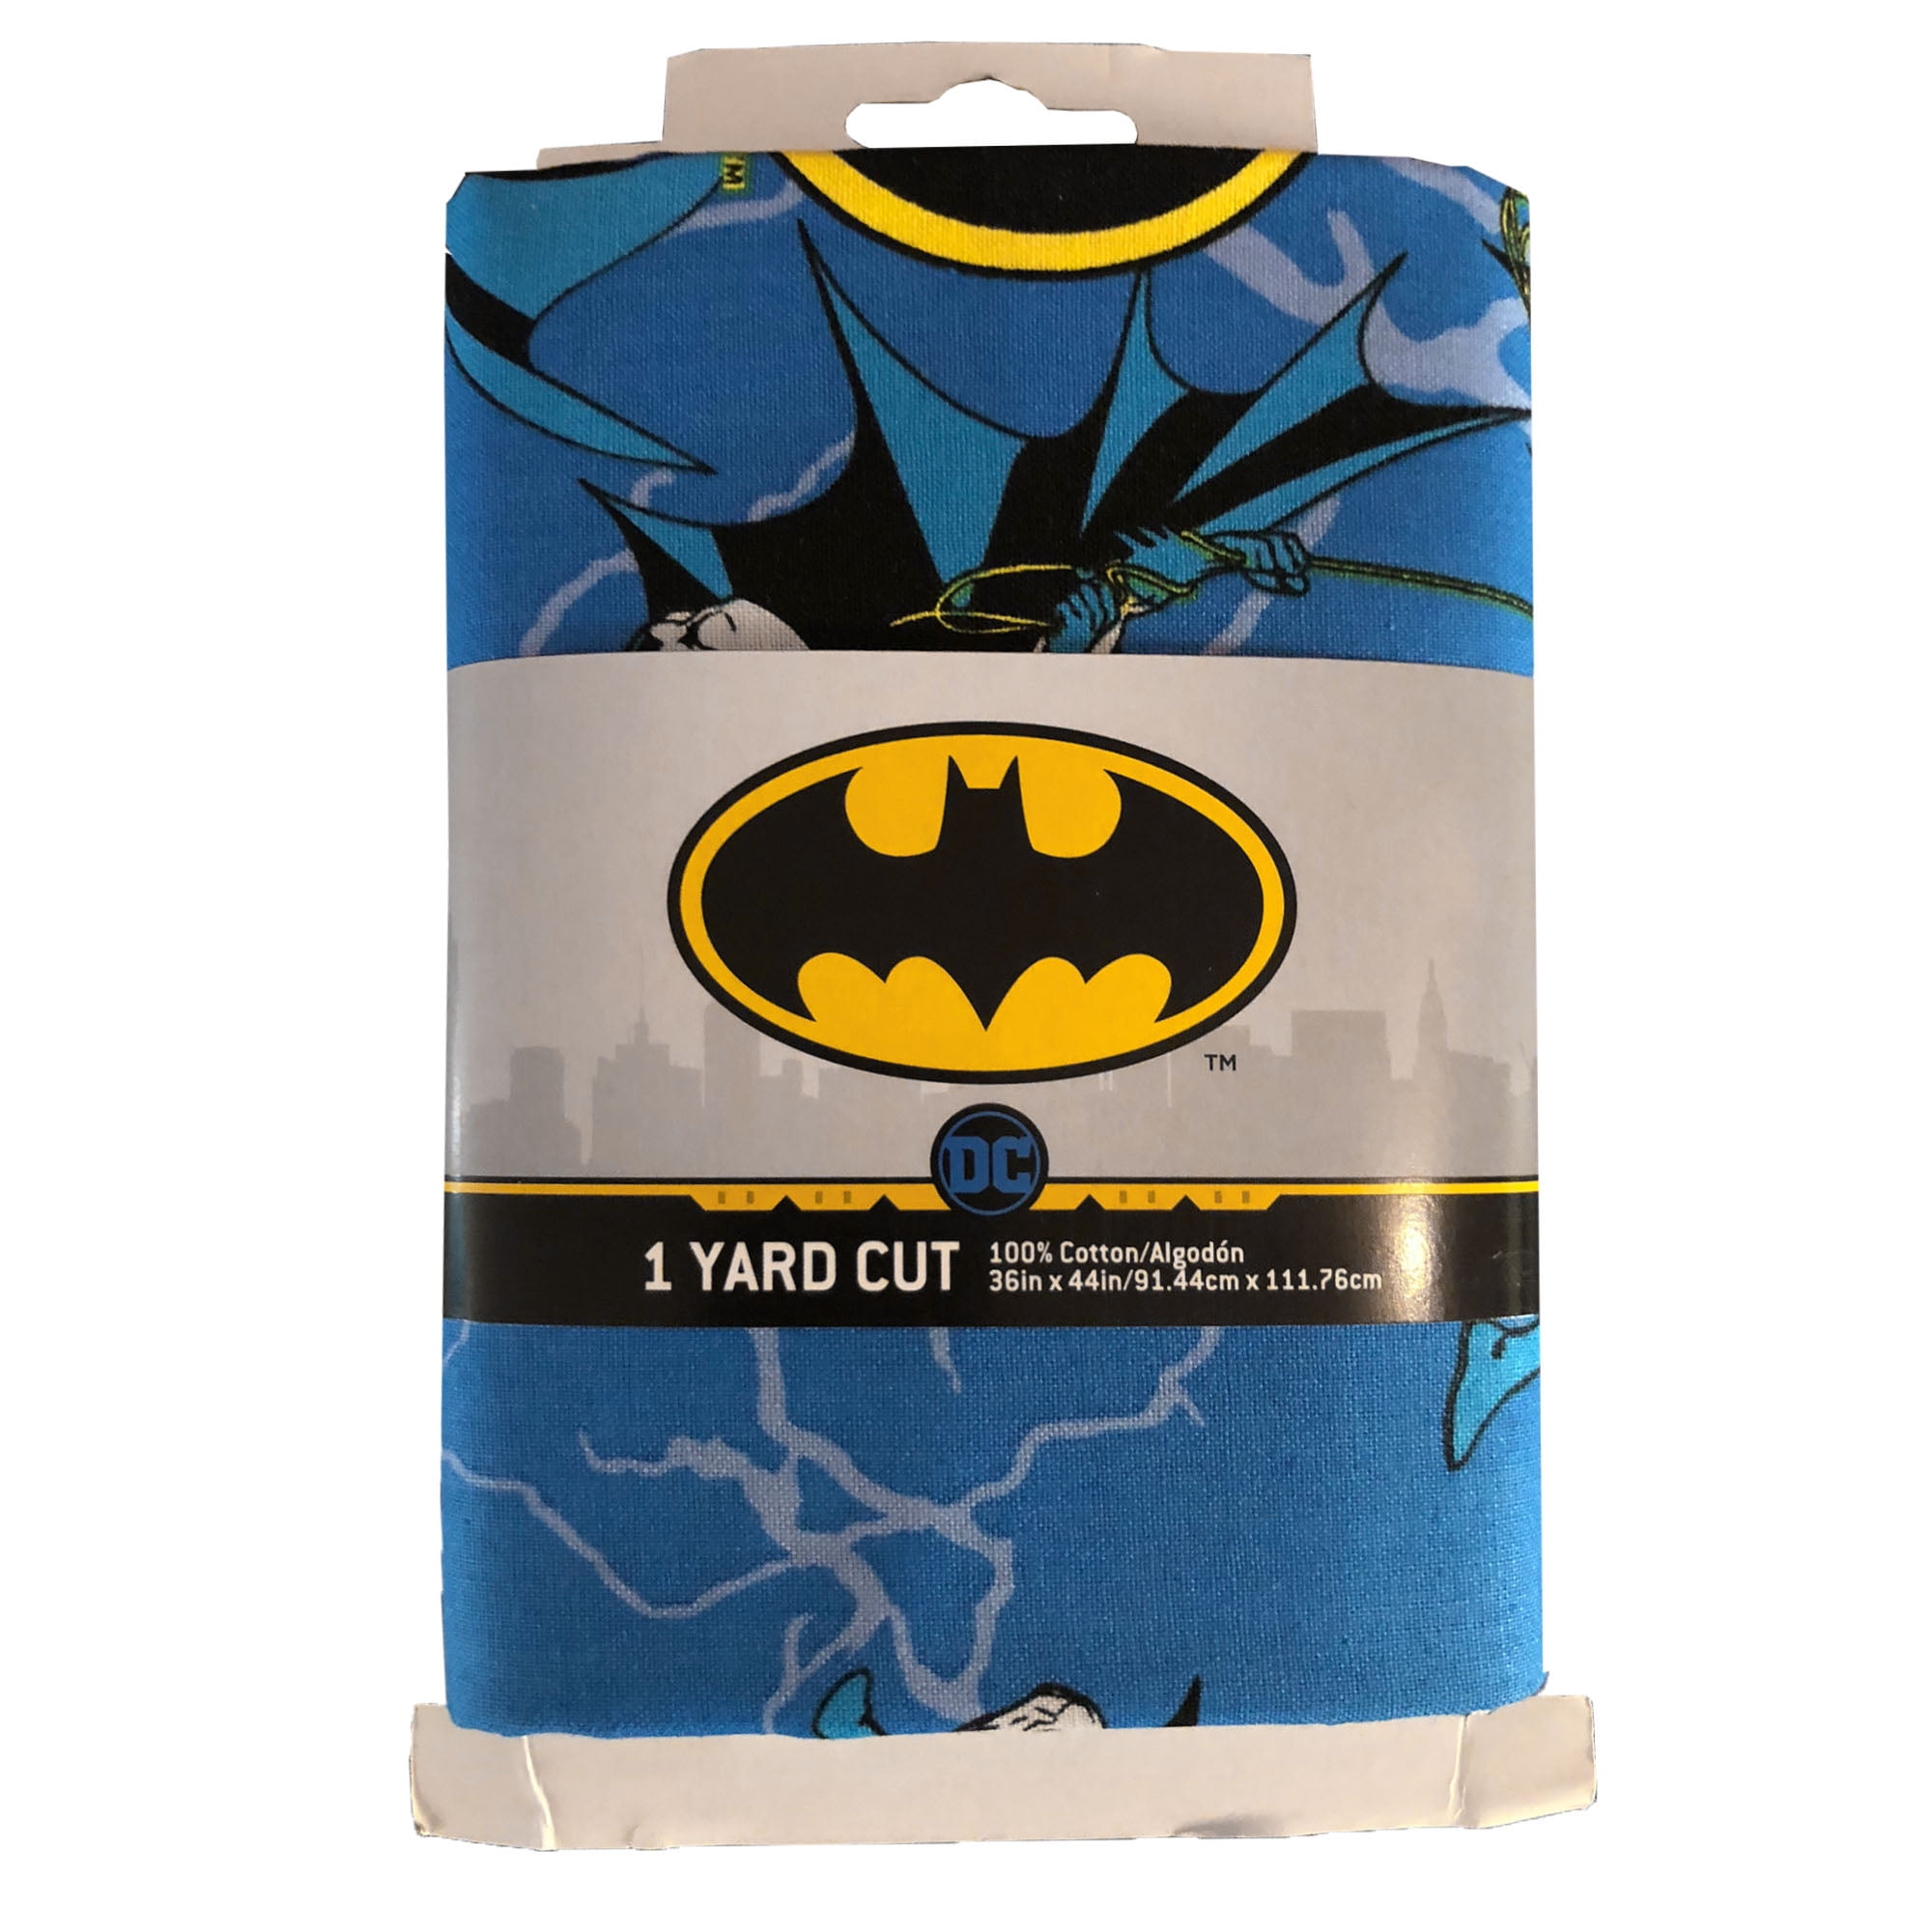 Batman Logo Fabric dressmaking and crafting DC Comics Licensed Cotton For quilting